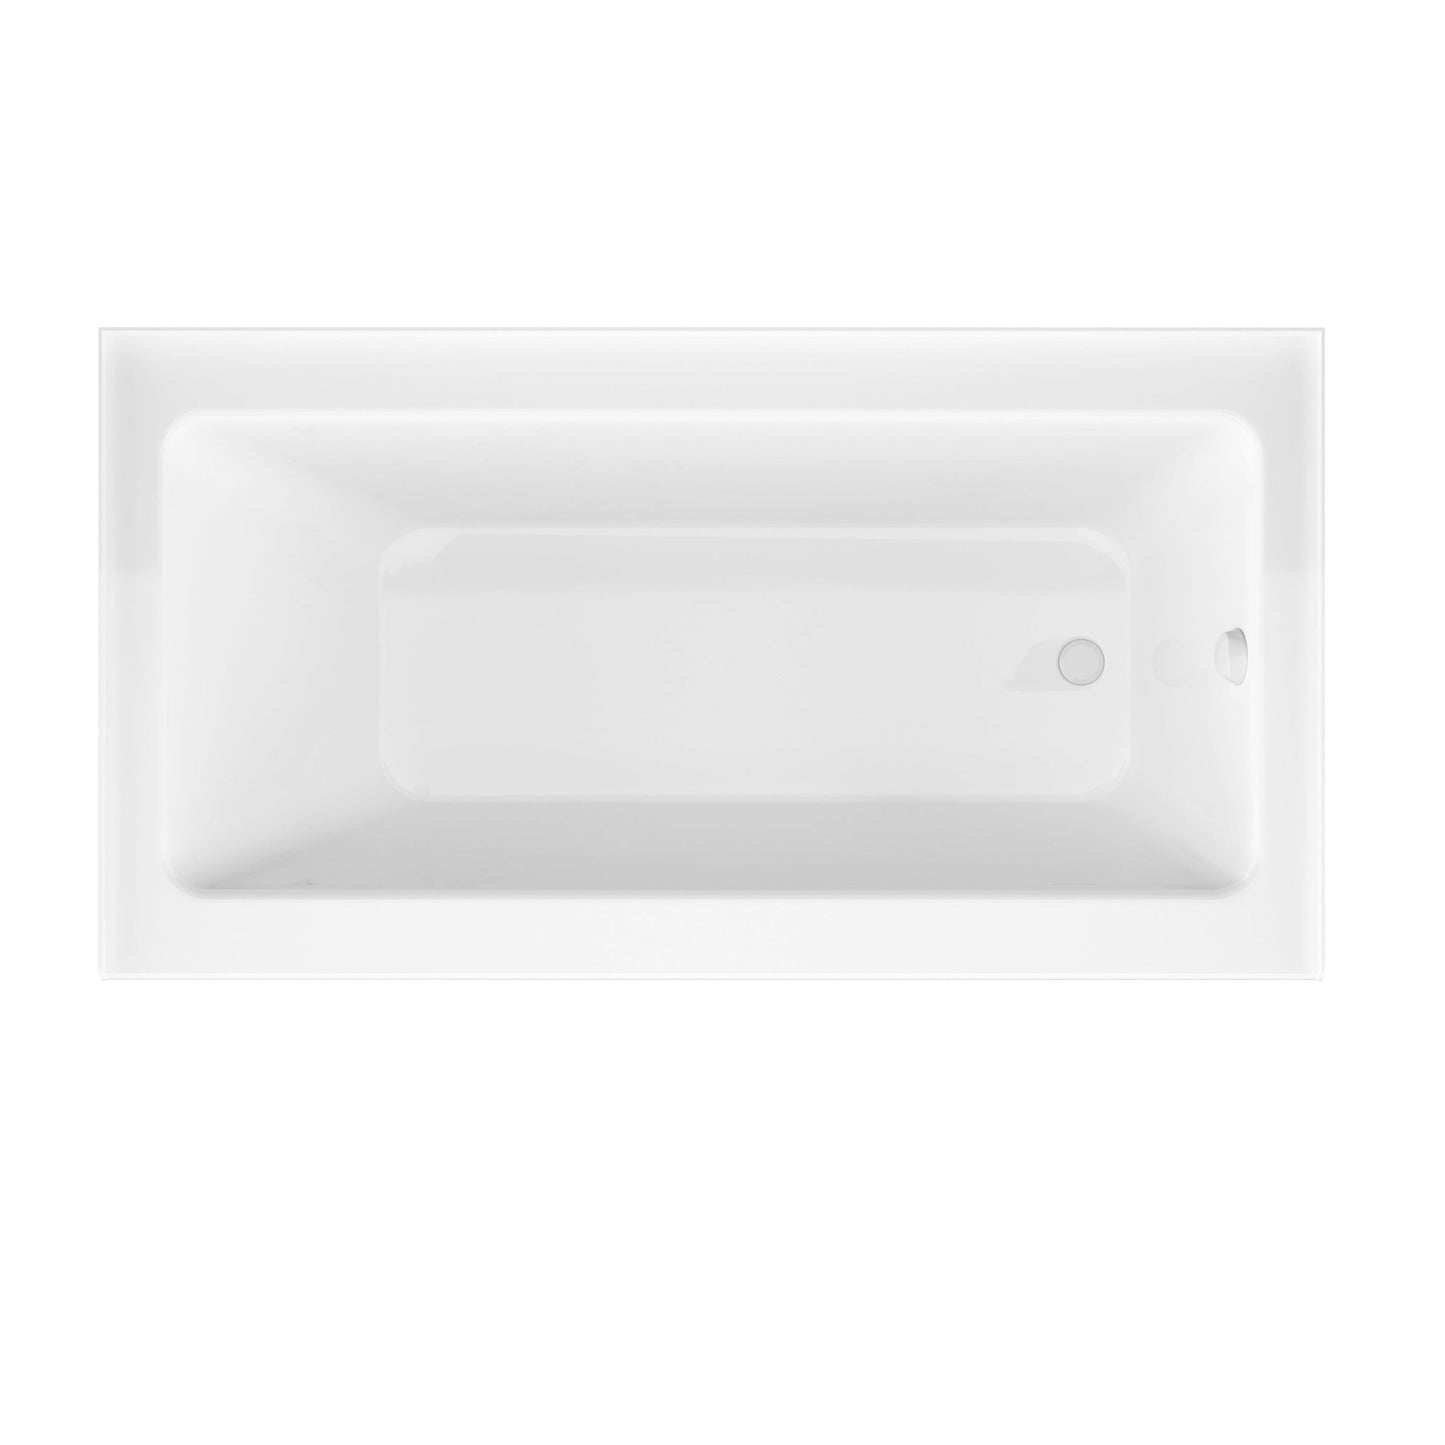 ANZZI Myth Series White "60 x 30" Alcove Right Drain Rectangular Bathtub With Built-In Flange and Frameless Polished Chrome Hinged Door